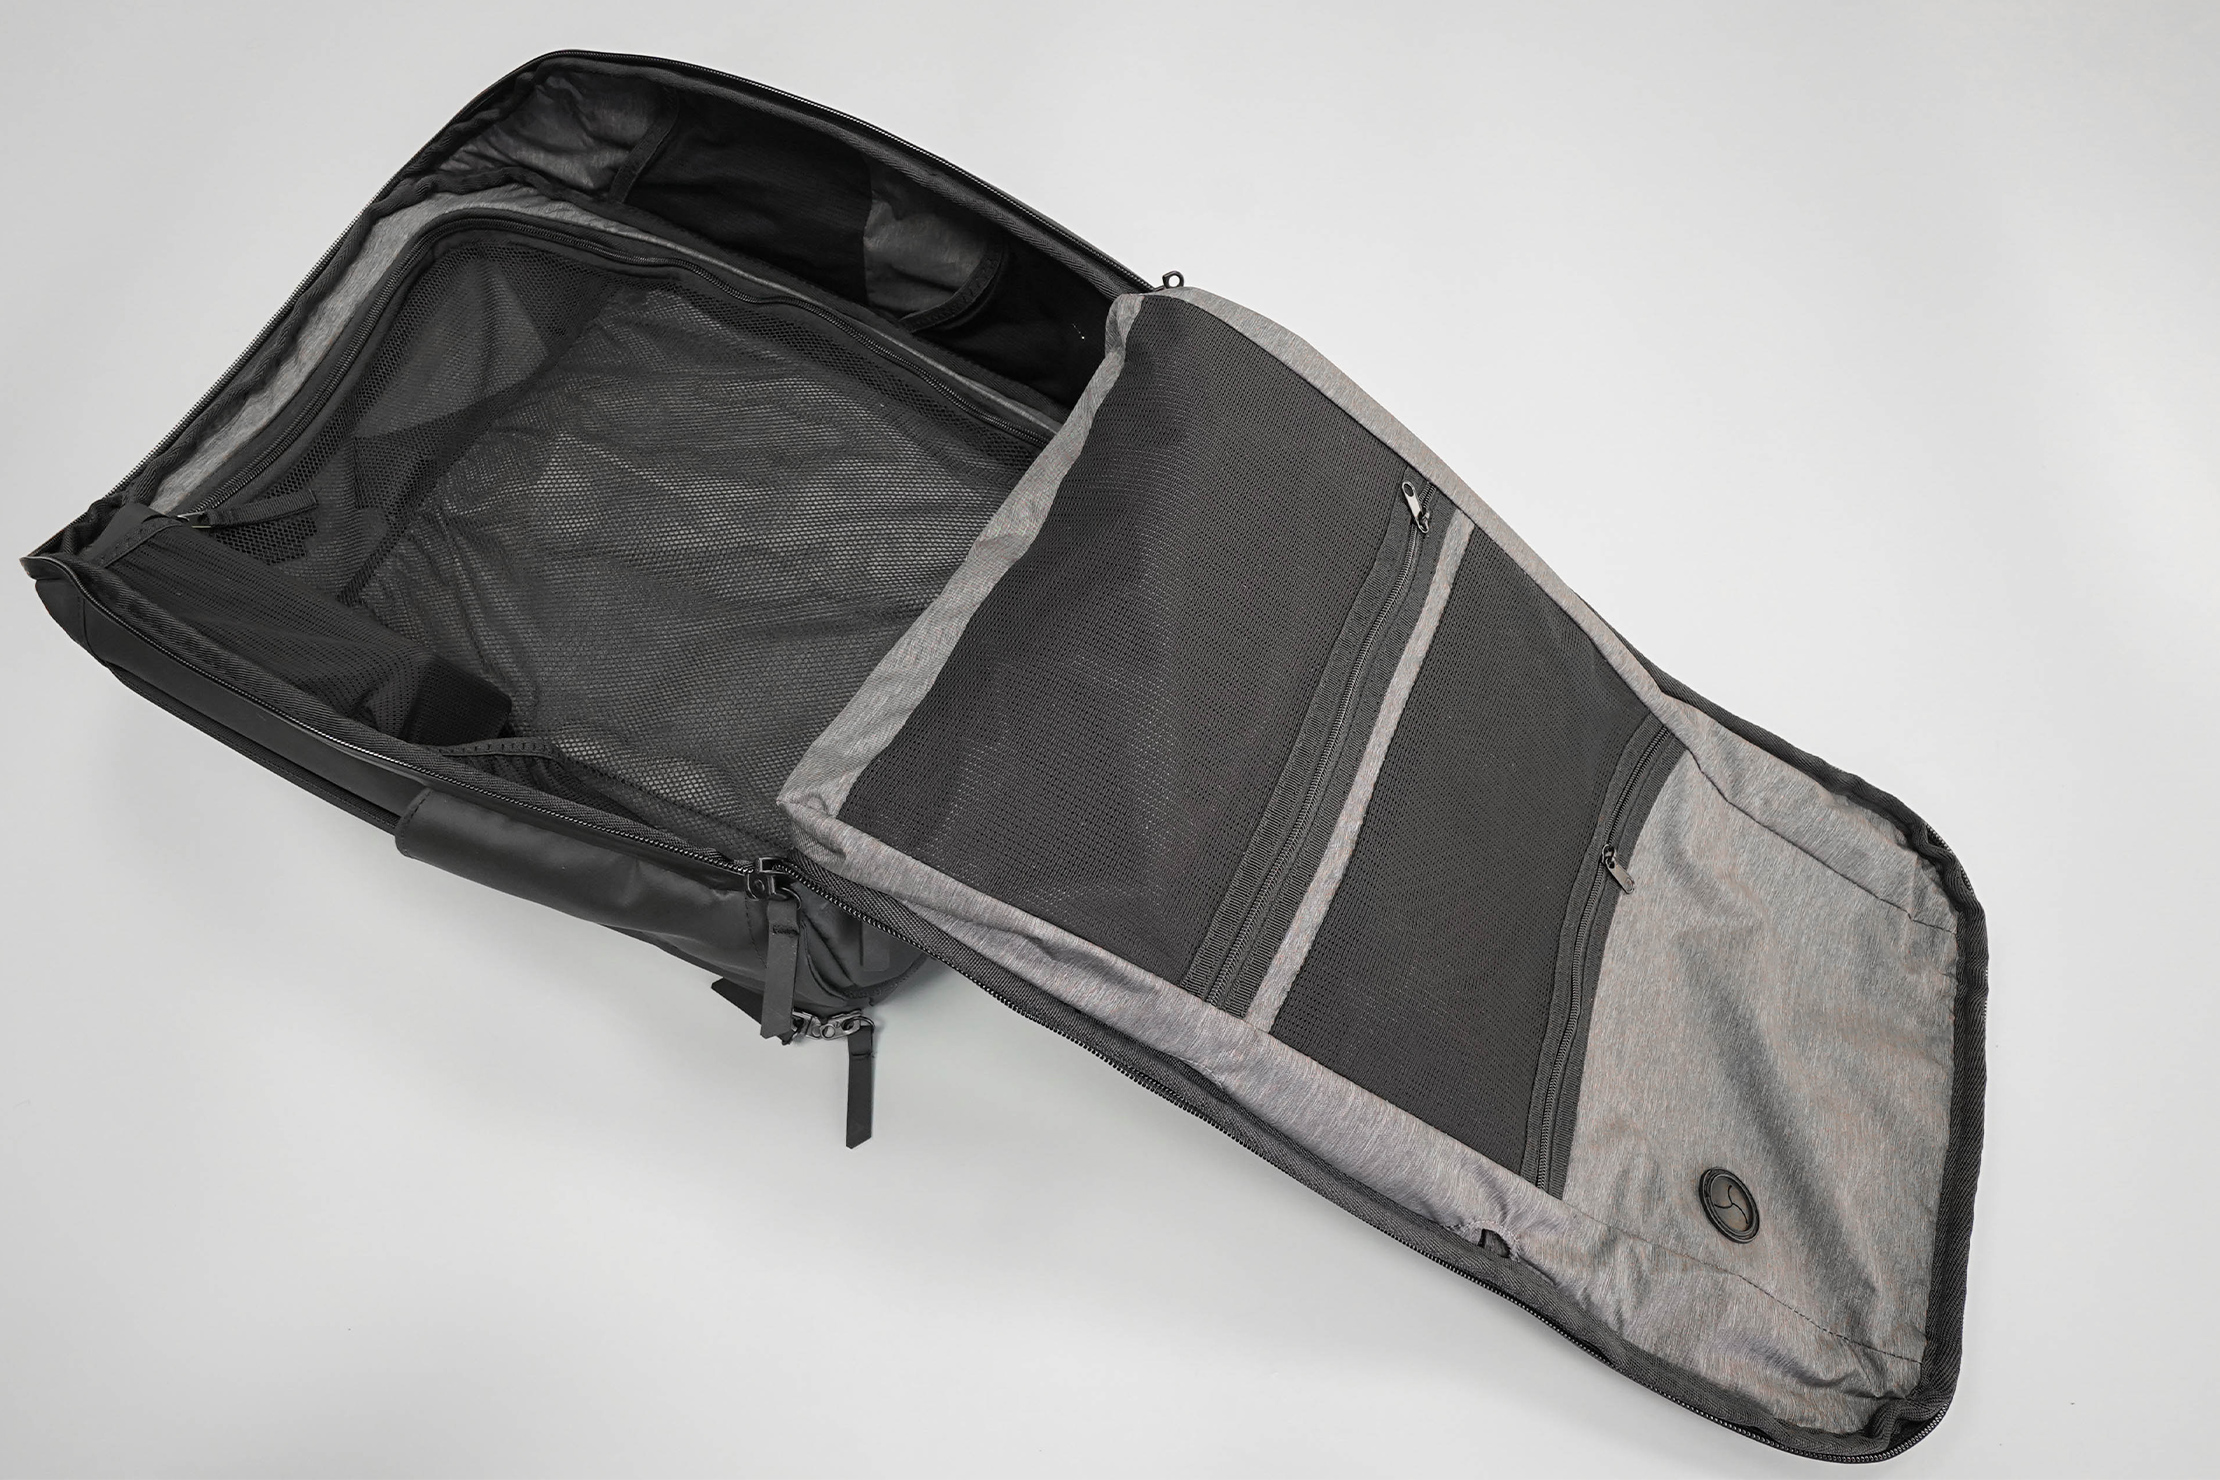 NOMATIC Travel Pack Main Compartment Open Clamshell